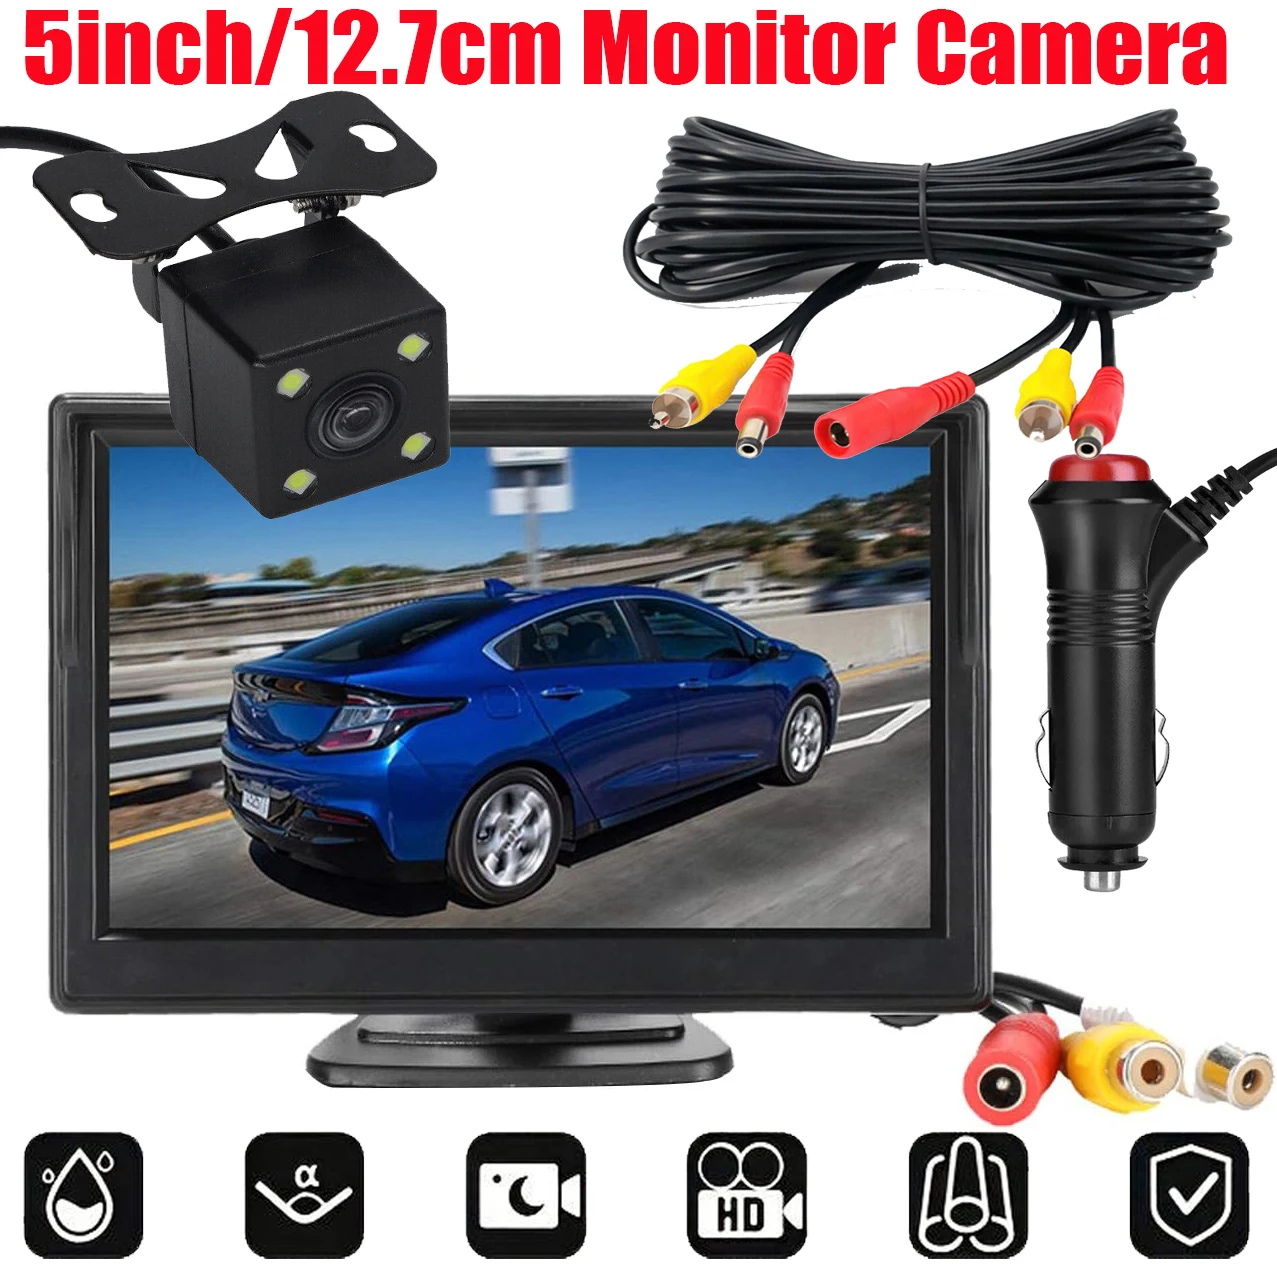 

5 inch TFT LCD Car HD Monitor Reverse Camera Security Display for Reverse Backup Parking Camera Drive Recorder